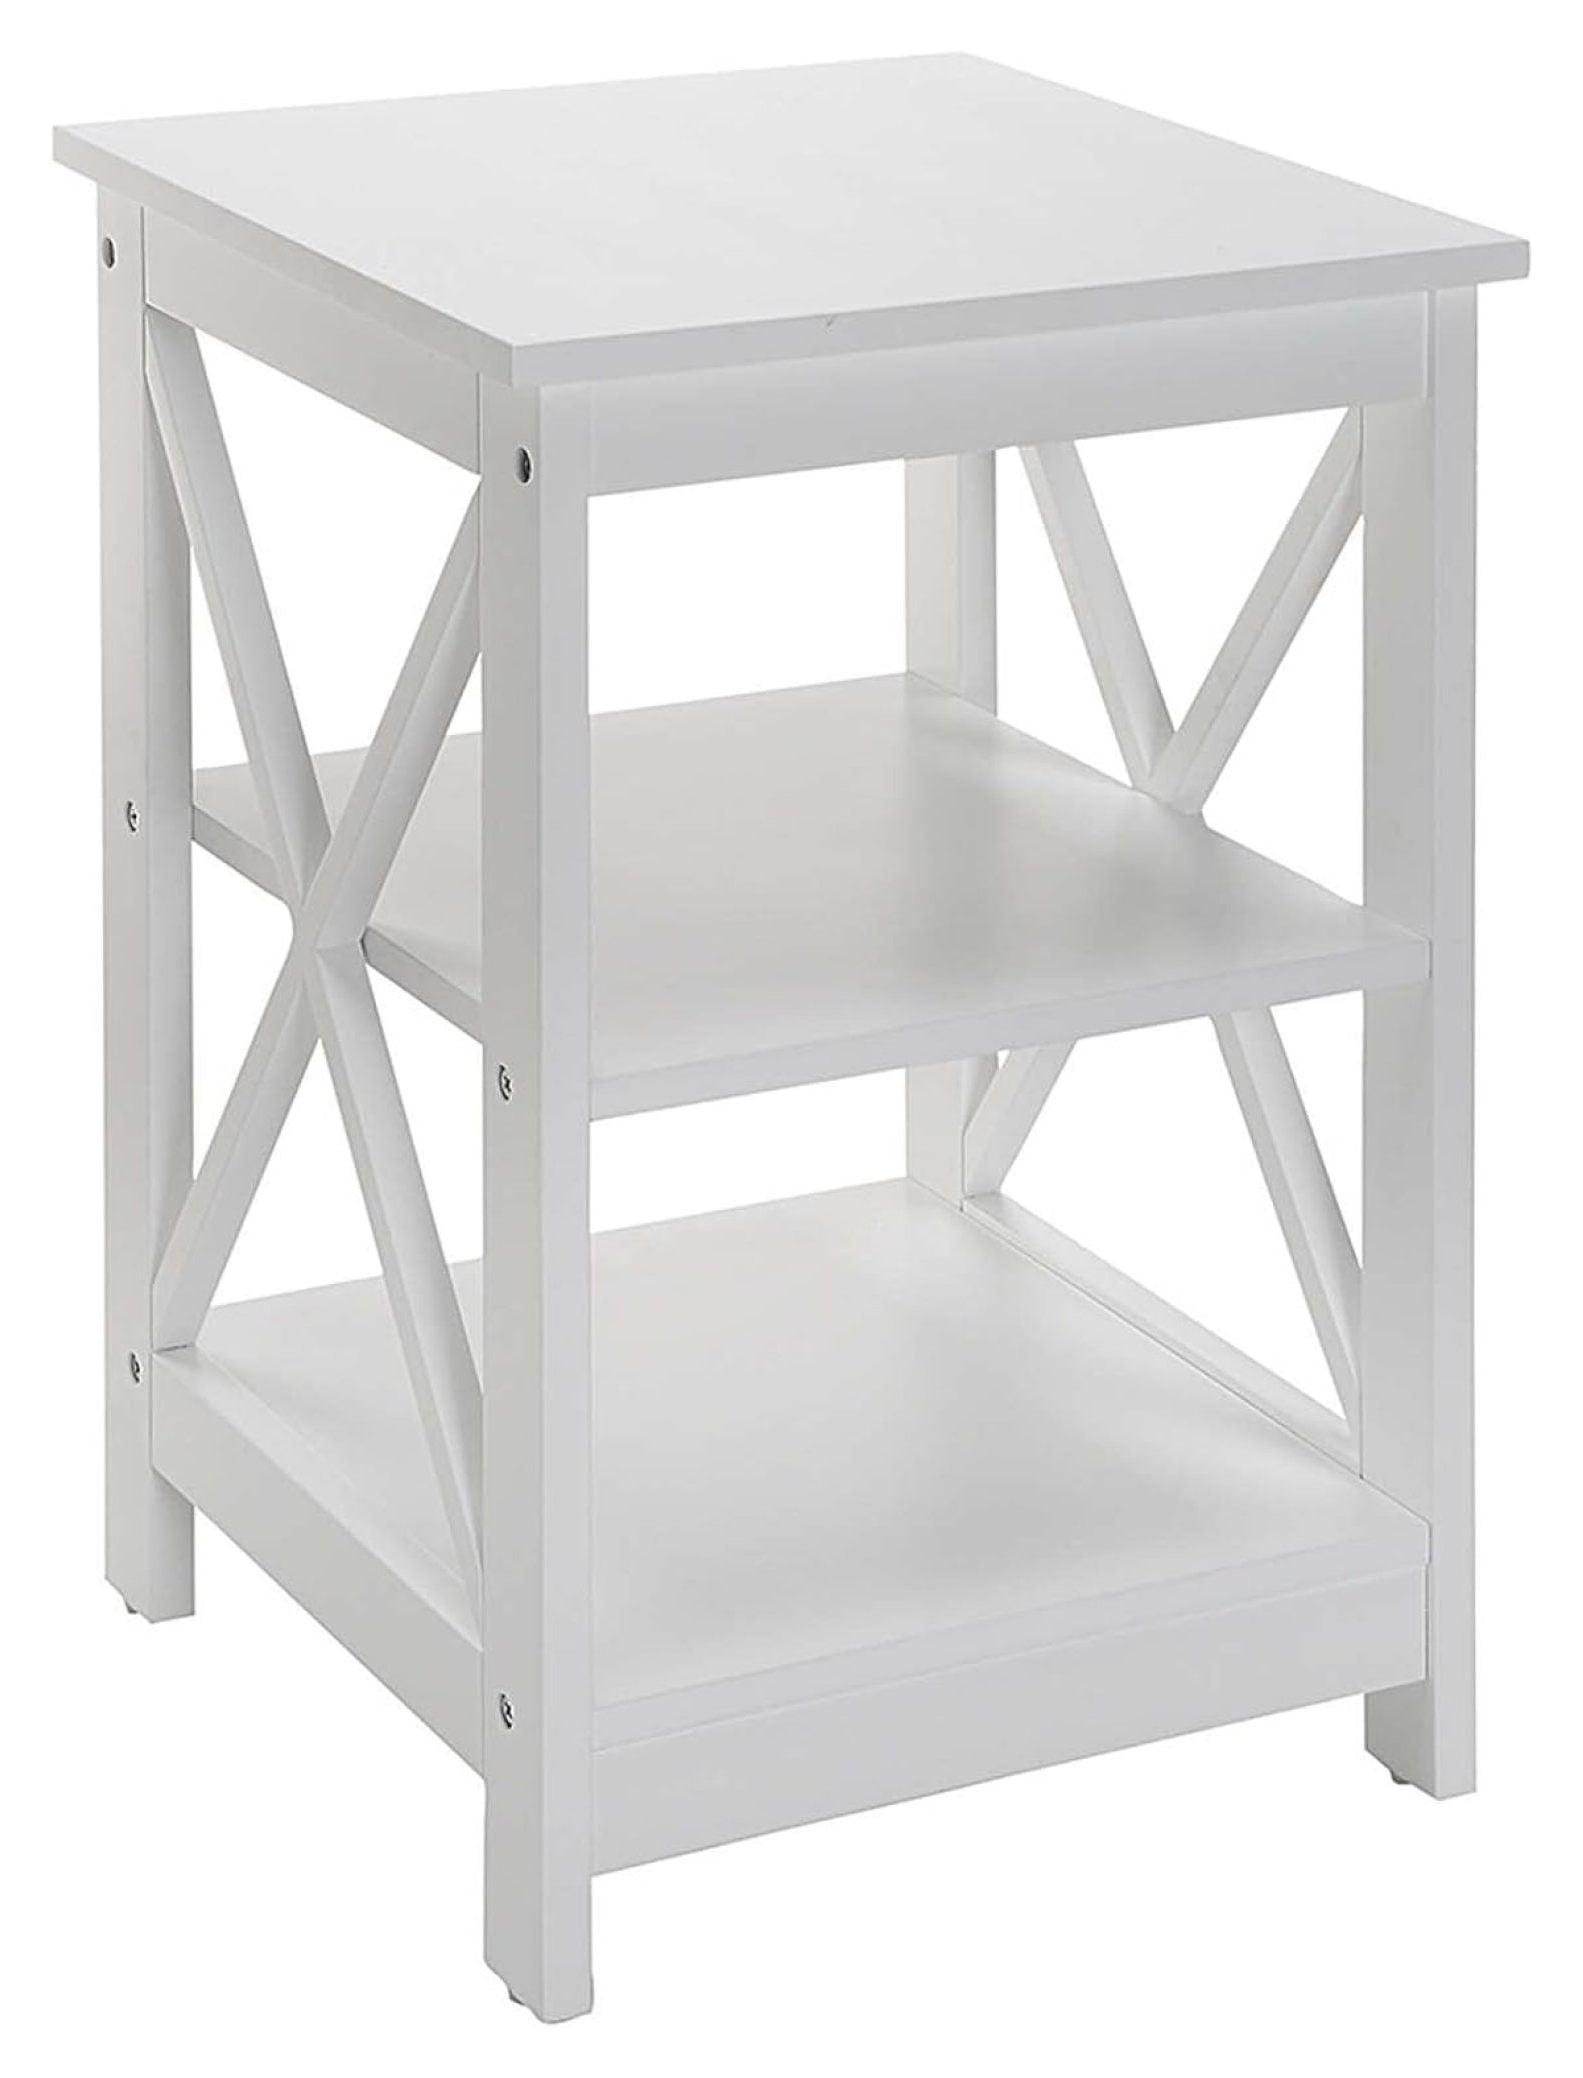 Coastal Farmhouse Chic White Square Wood End Table with Shelves